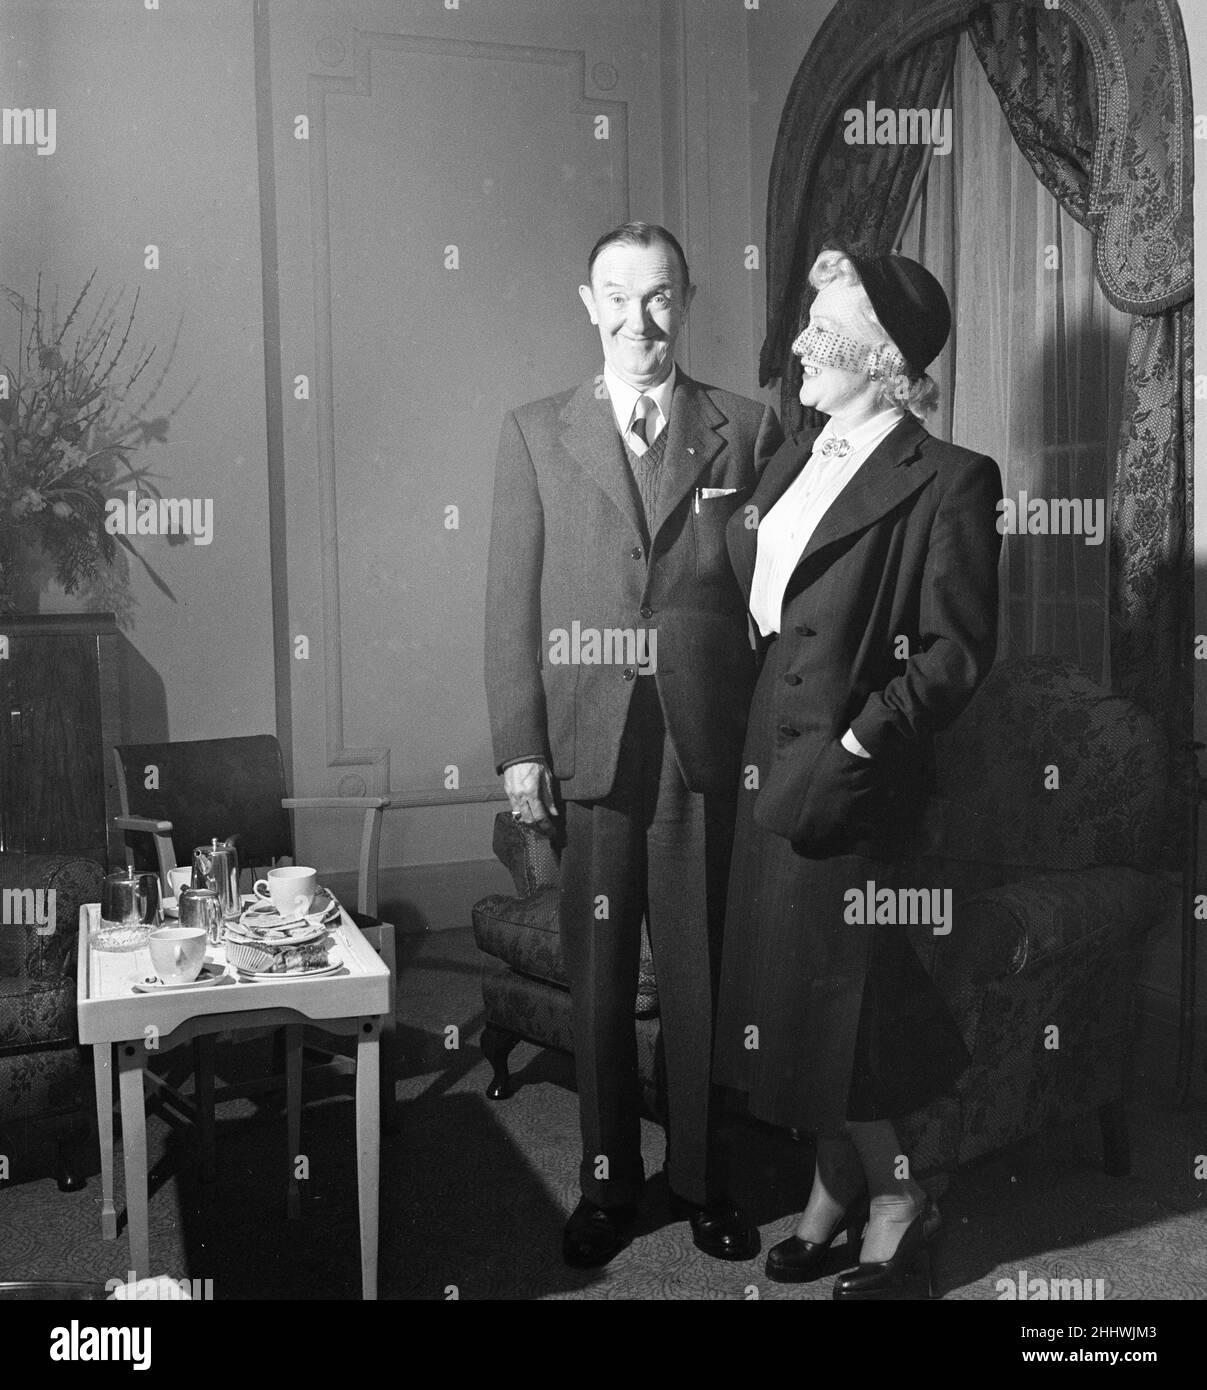 Stan Laurel and Oliver Hardy, arrived in the UK Monday (28th January), travelling on the RMS Queen Mary ocean liner, for a 10 week variety tour of British Music Halls, pictured London, Tuesday 29th January 1952.  Our Picture Shows ... Stan Laurel and wife Ida Kitaeva Raphael. Stock Photo